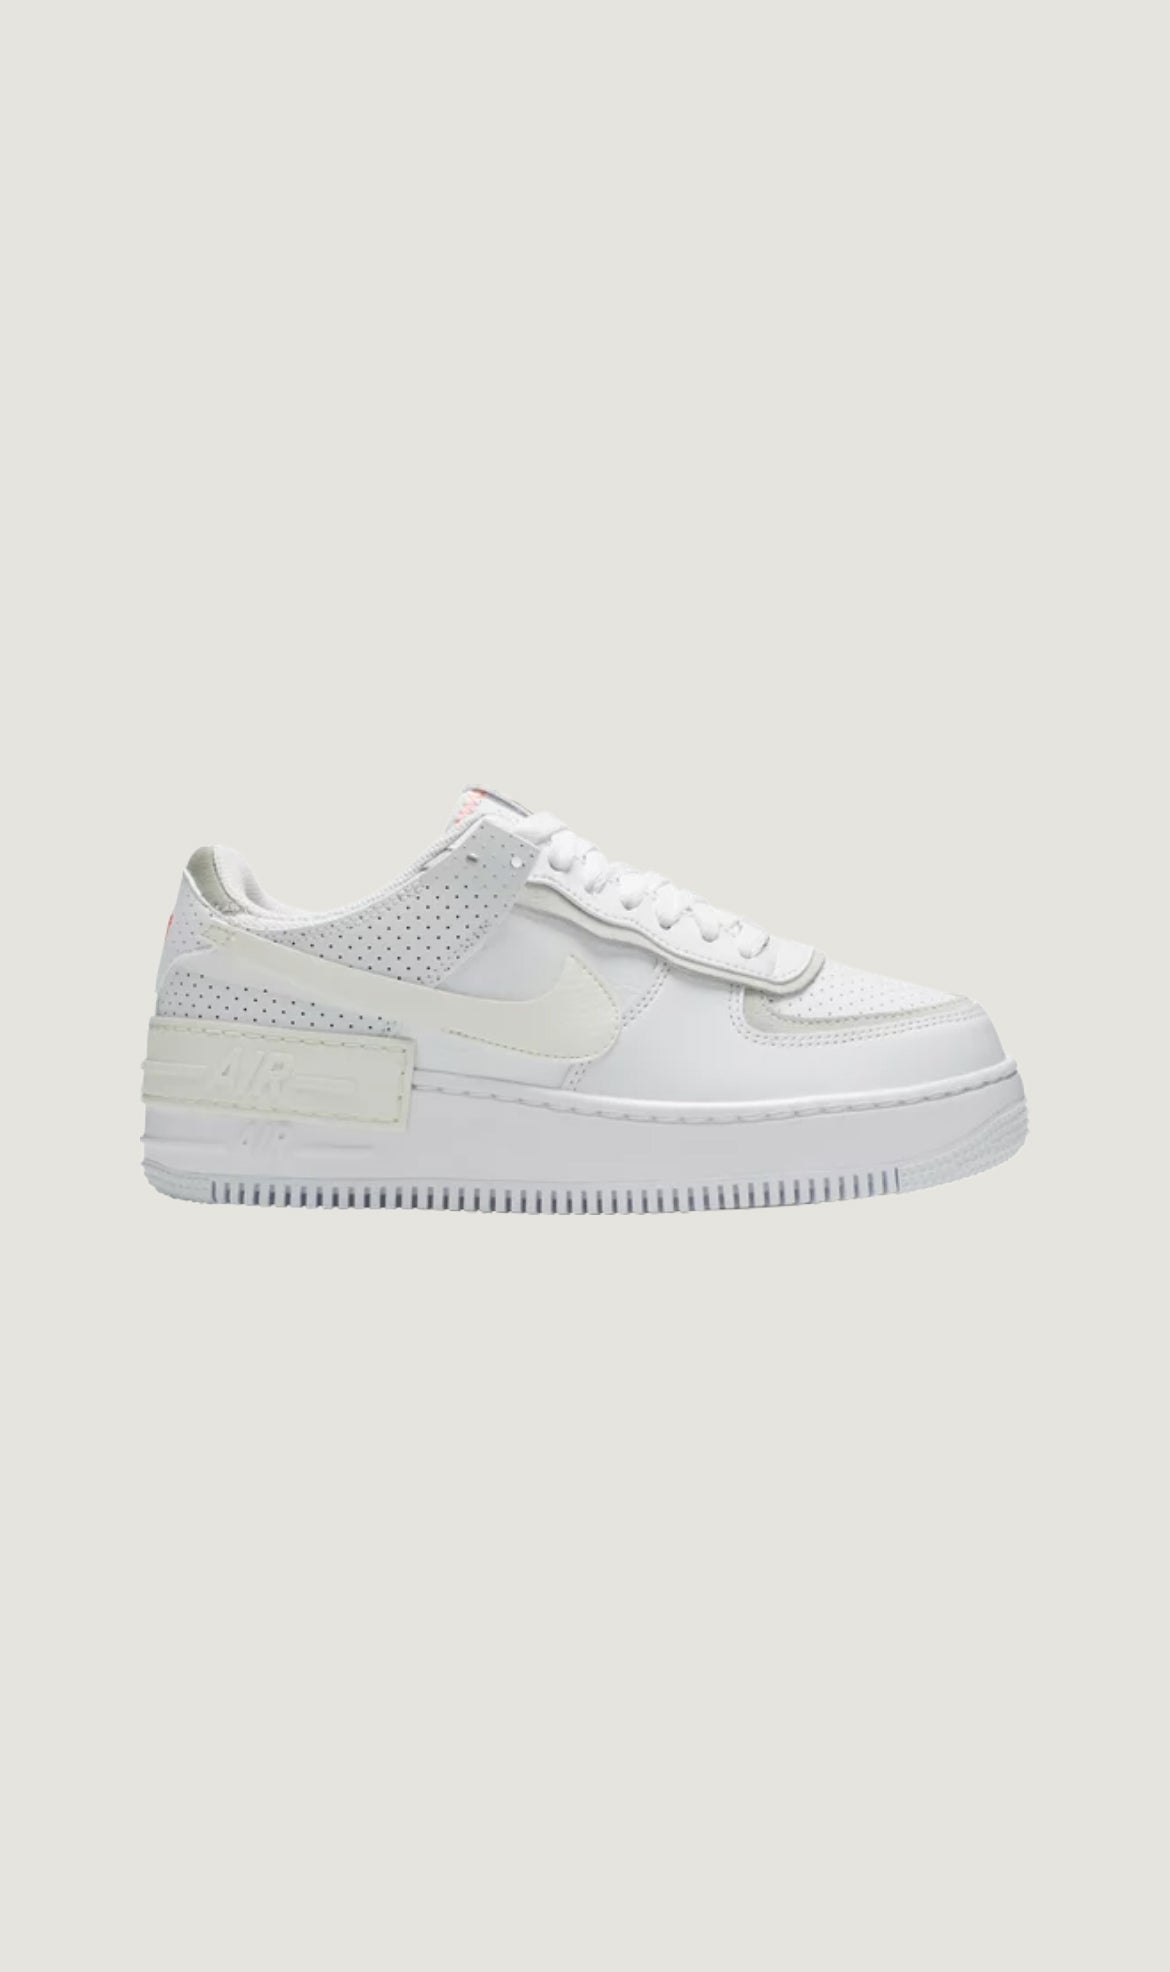 WMNS AIR FORCE 1 SHADOW - WHITE ATOMIC PINK